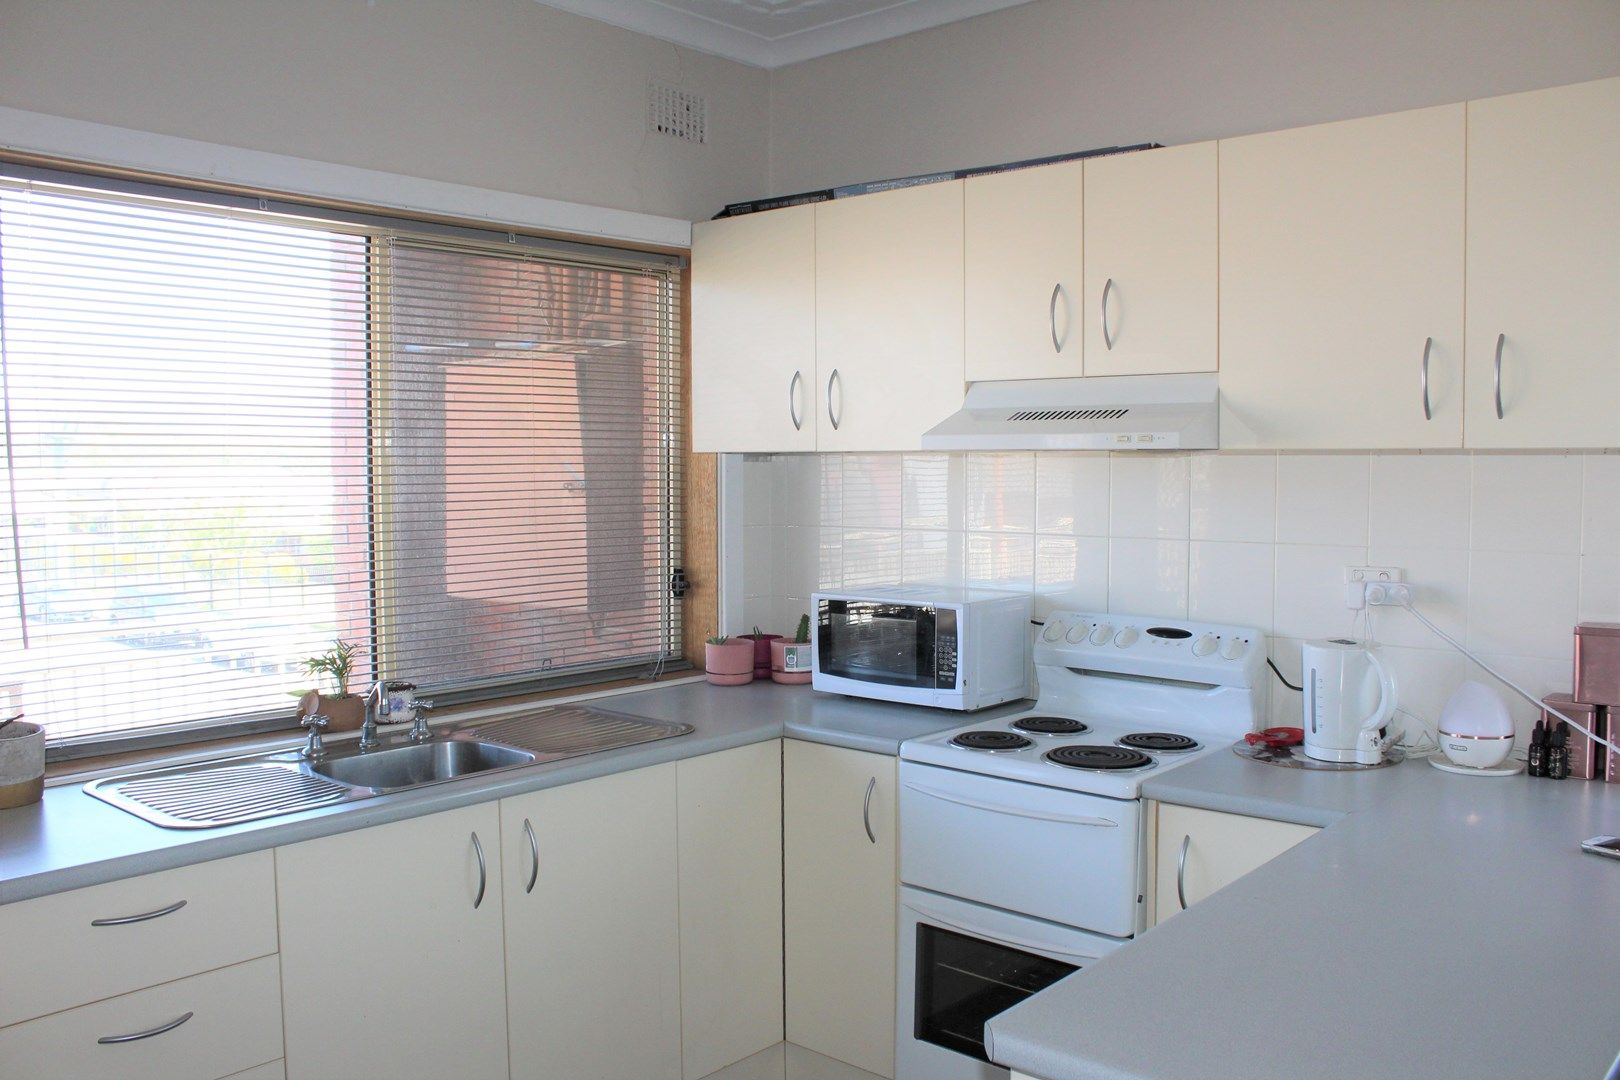 3/75 Central Ave, Oak Flats NSW 2529, Image 0